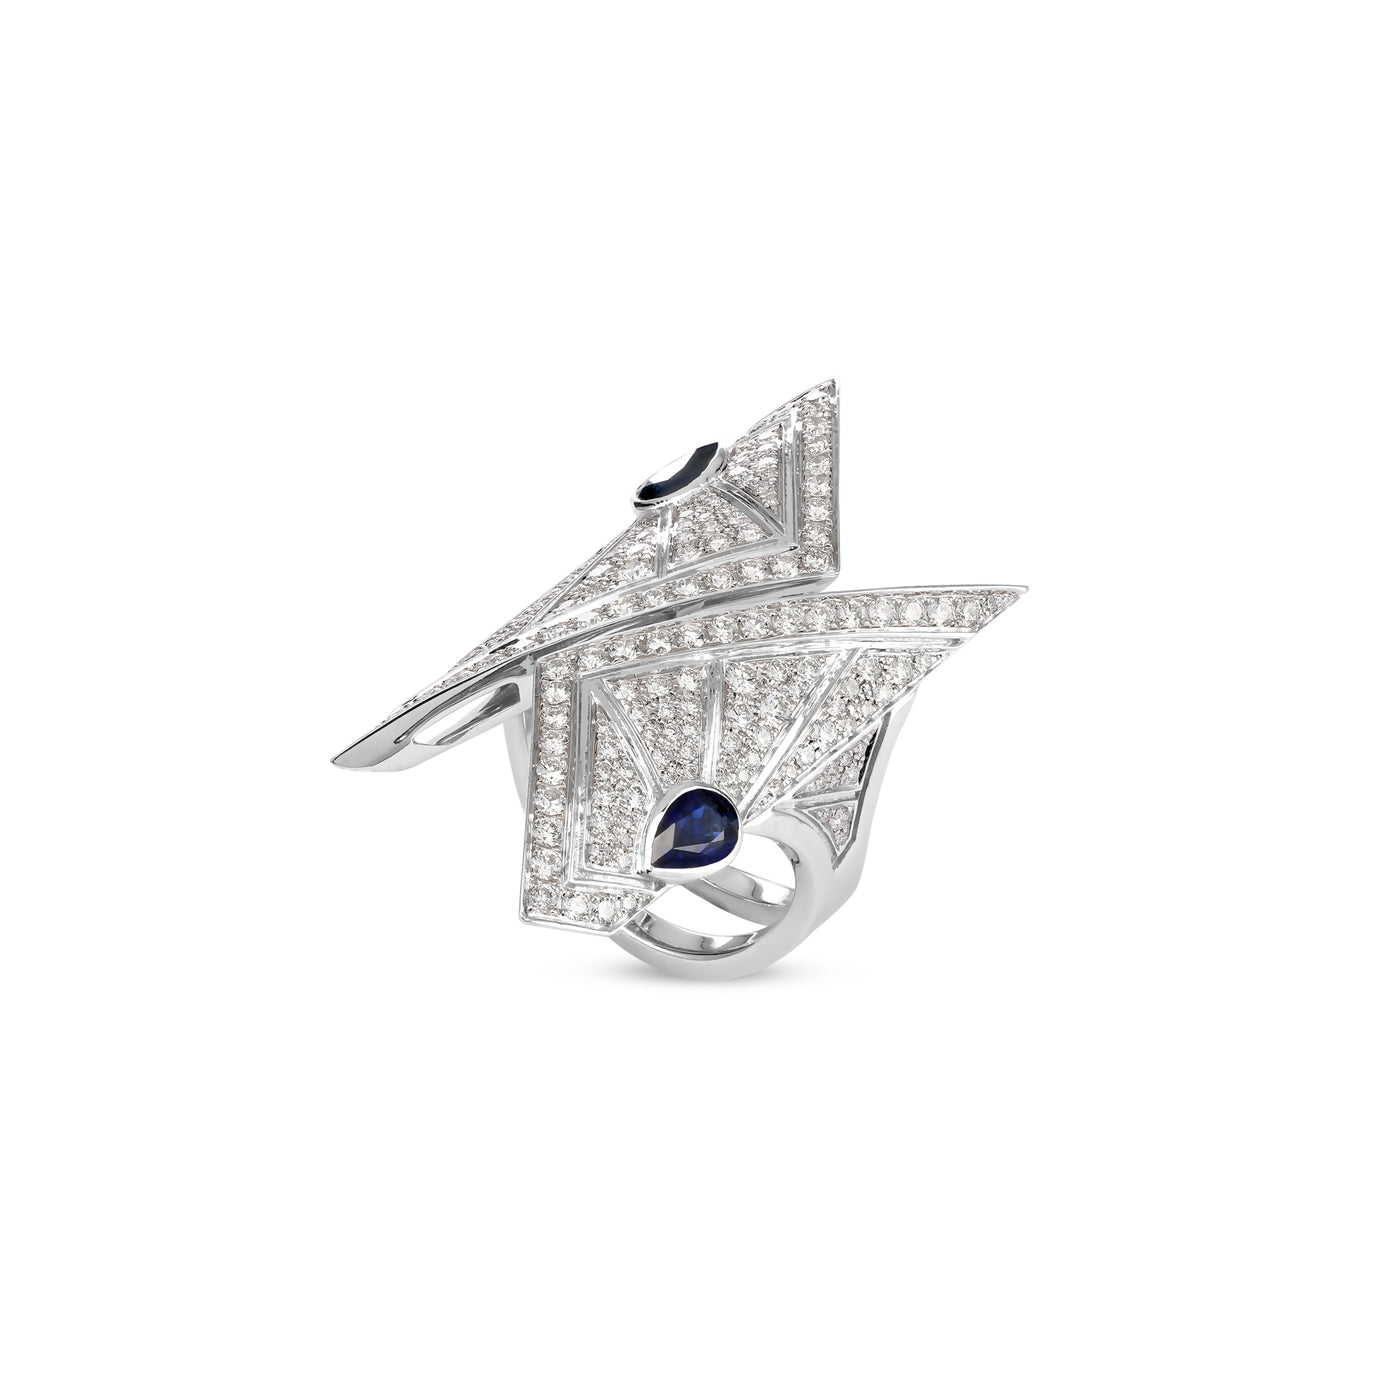 Soit Belle White Gold Pointed Diamond Ring With Natural Sapphire: Timeless Beauty